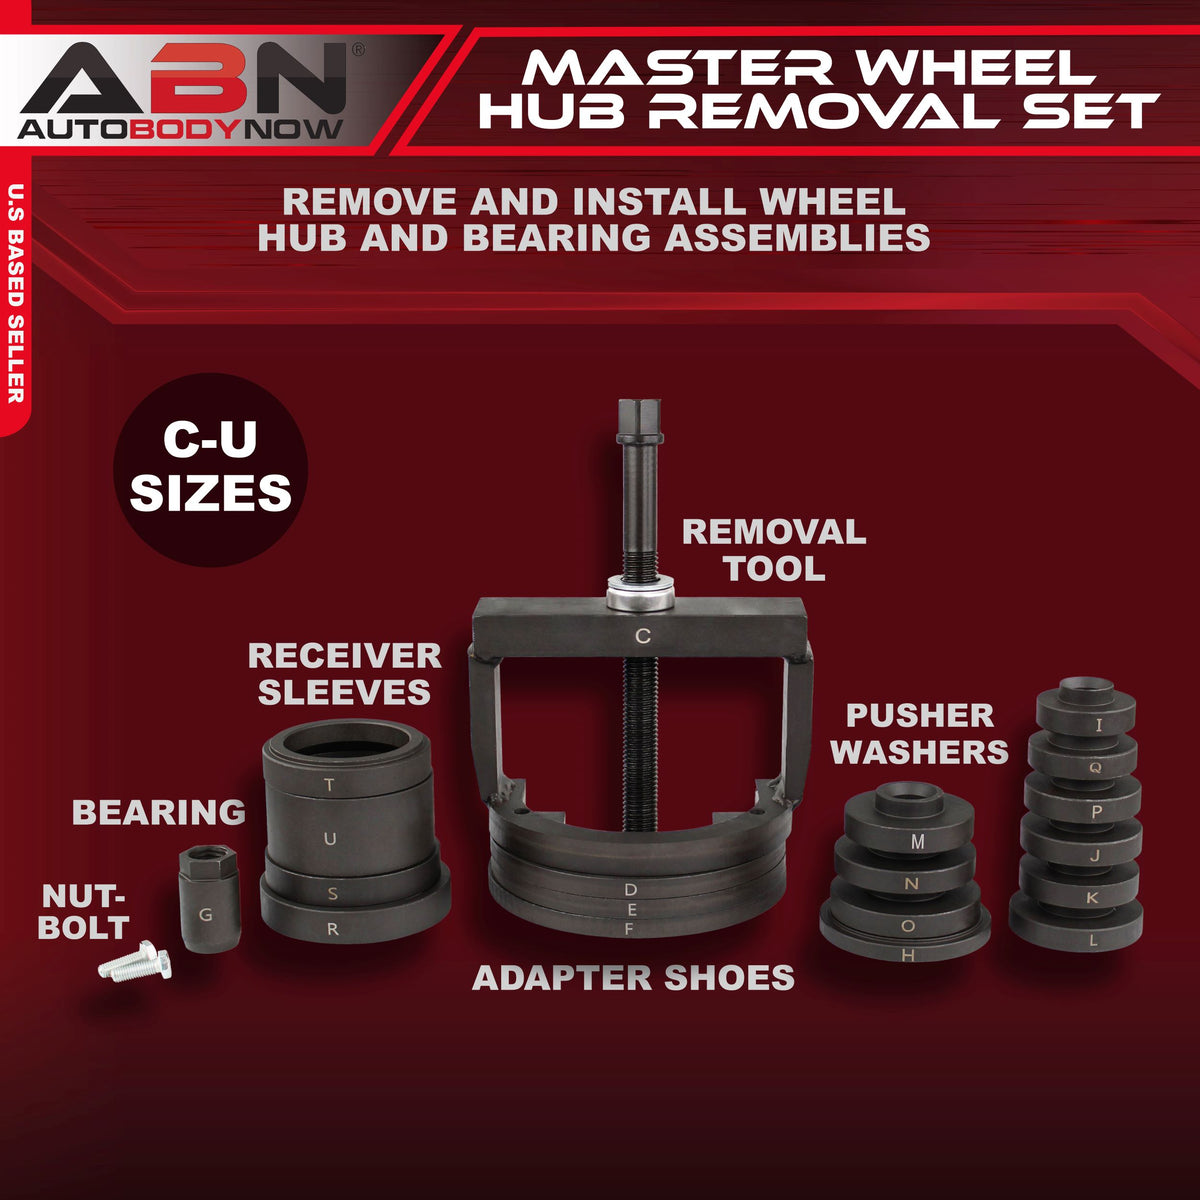 Wheel Hub Removal Tools - C to U Wheel Bearing Remover and Installers